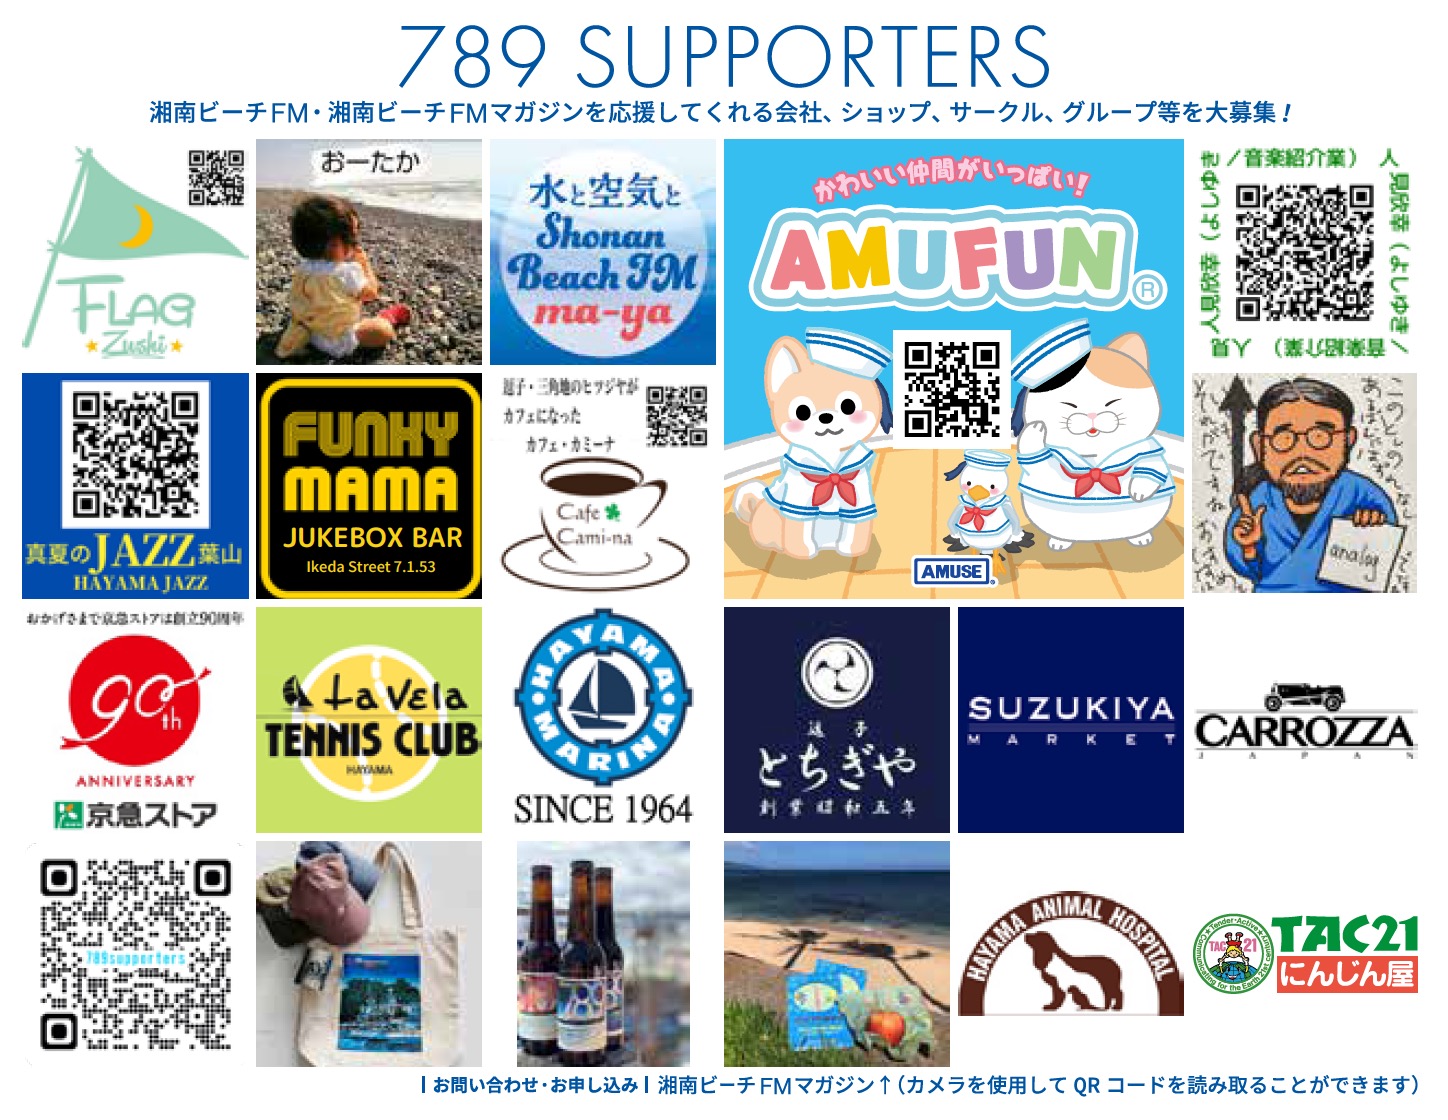 789 SUPPORTERS